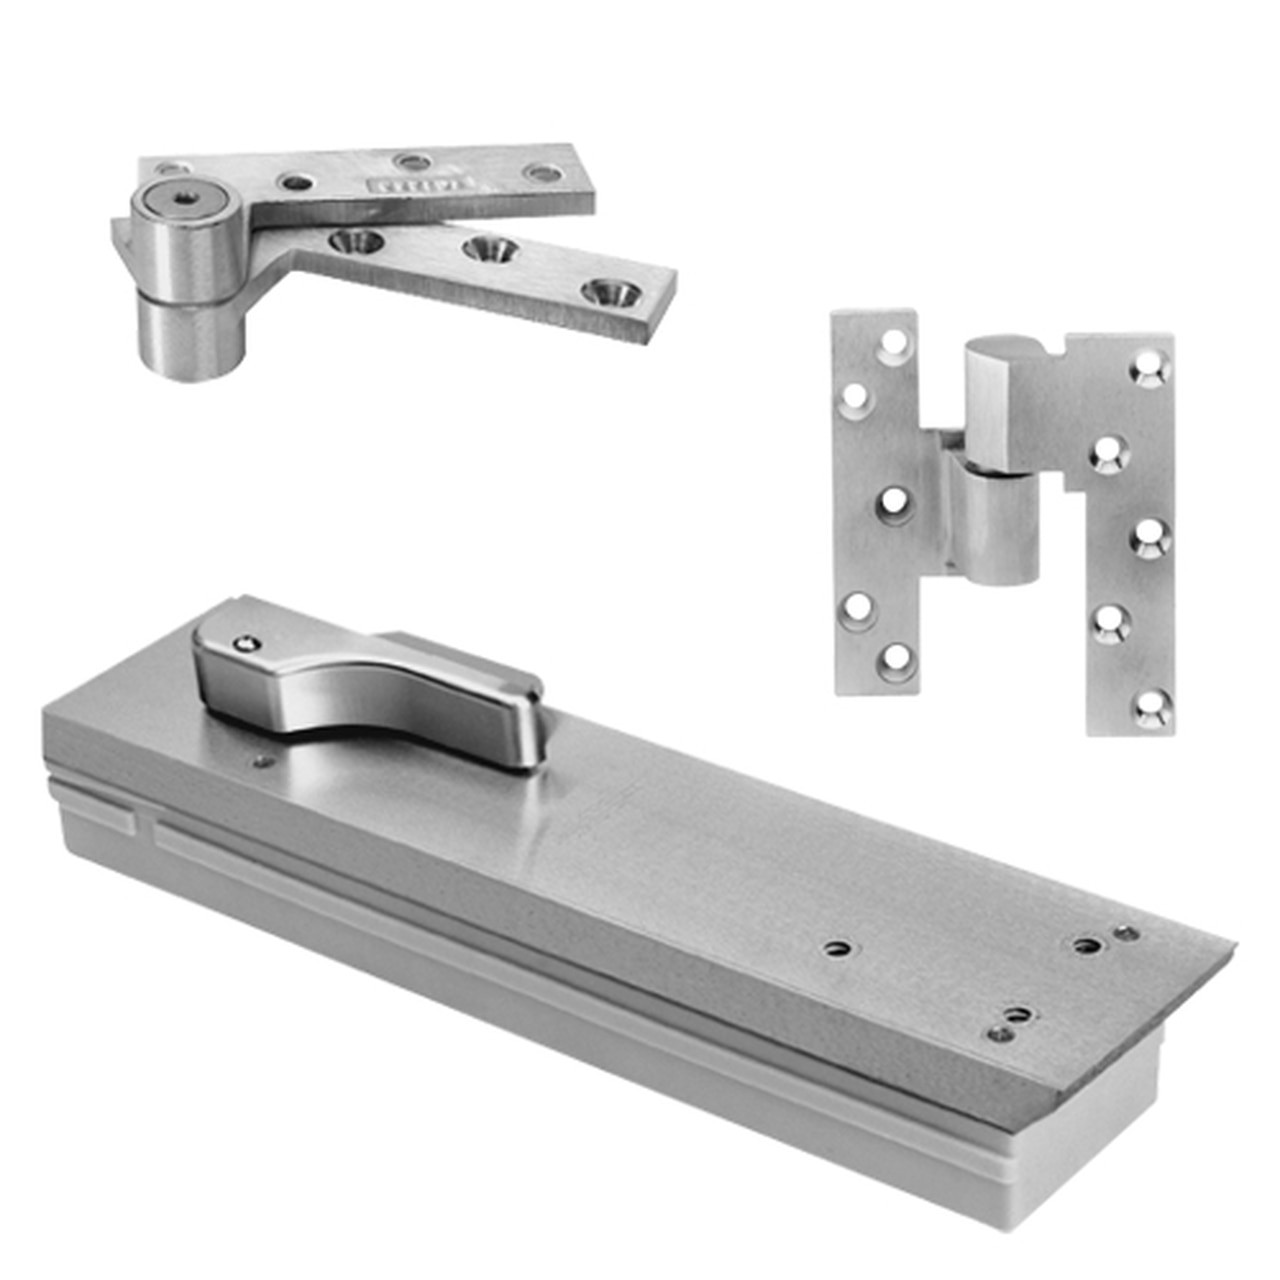 FQ5103NBC-SC-LH-626 Rixson Q51 Series Fire Rated 3/4" Offset Hung Shallow Depth Floor Closers in Satin Chrome Finish